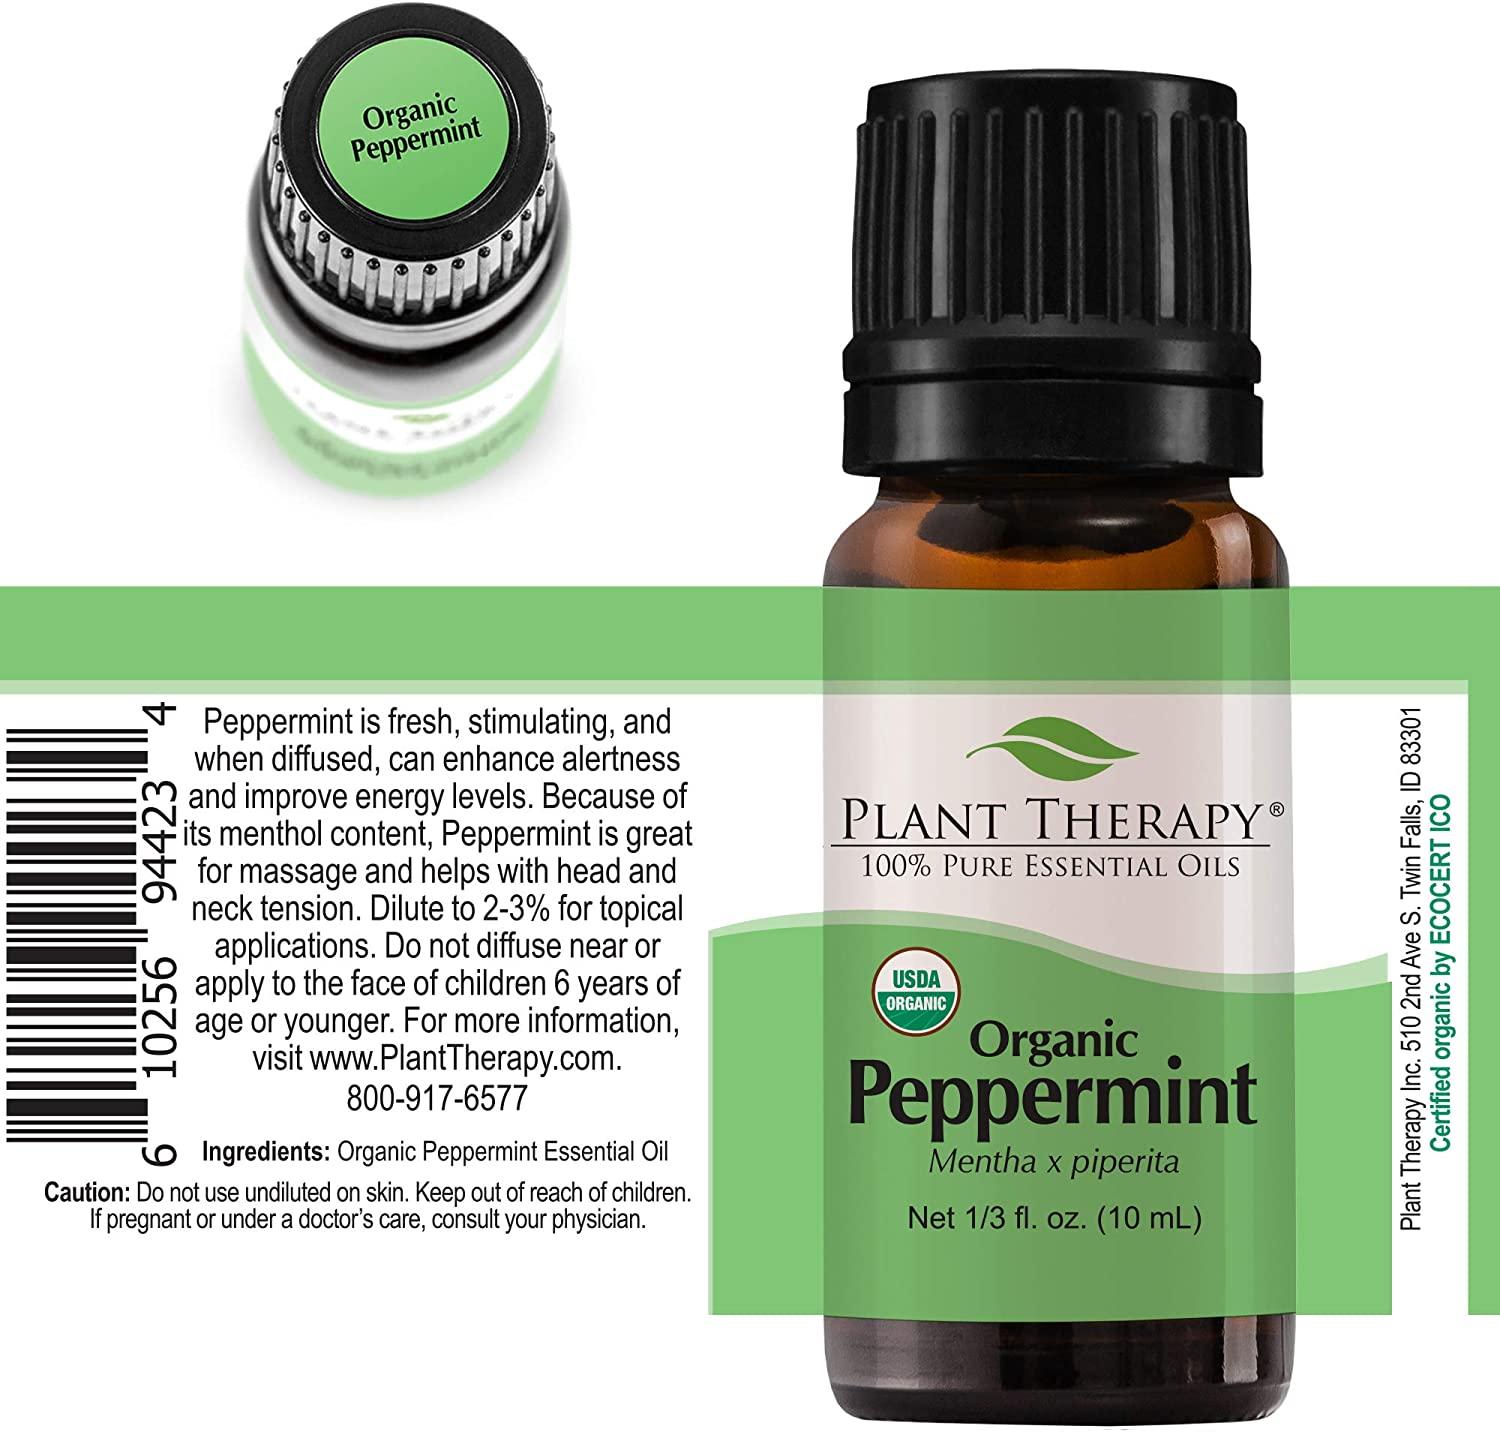 Plant Therapy Organic Peppermint Essential Oil 100% Pure, USDA Certified  Organic, Undiluted, Natural Aromatherapy, Therapeutic Grade 10 mL (1/3 oz)  0.33 Fl Oz (Pack of 1)